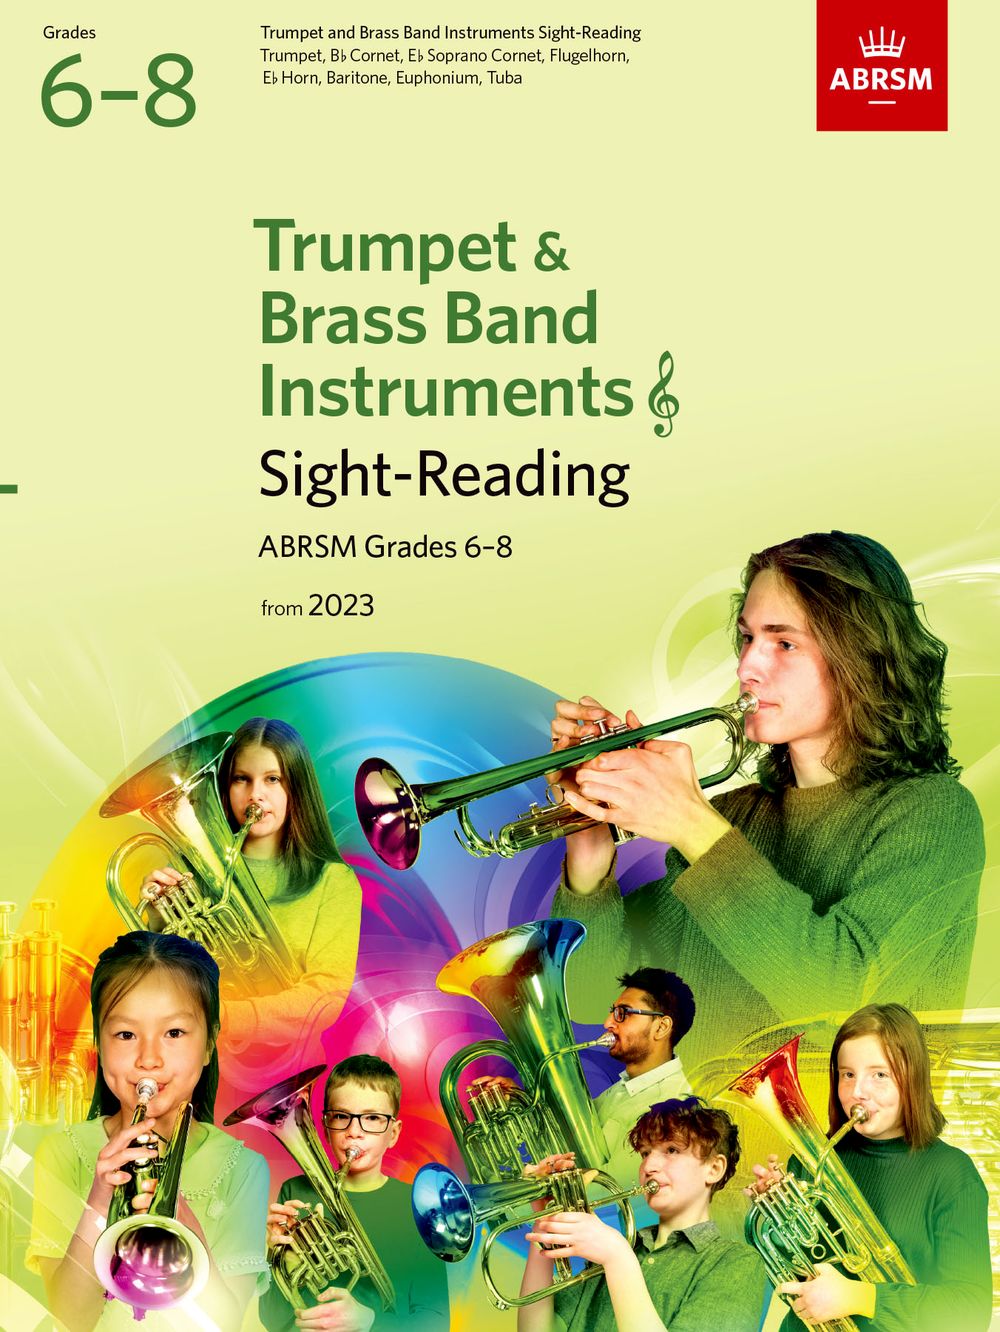 Sight-reading Trumpet & Brass Insts 2023 6-8 Abrsm Sheet Music Songbook